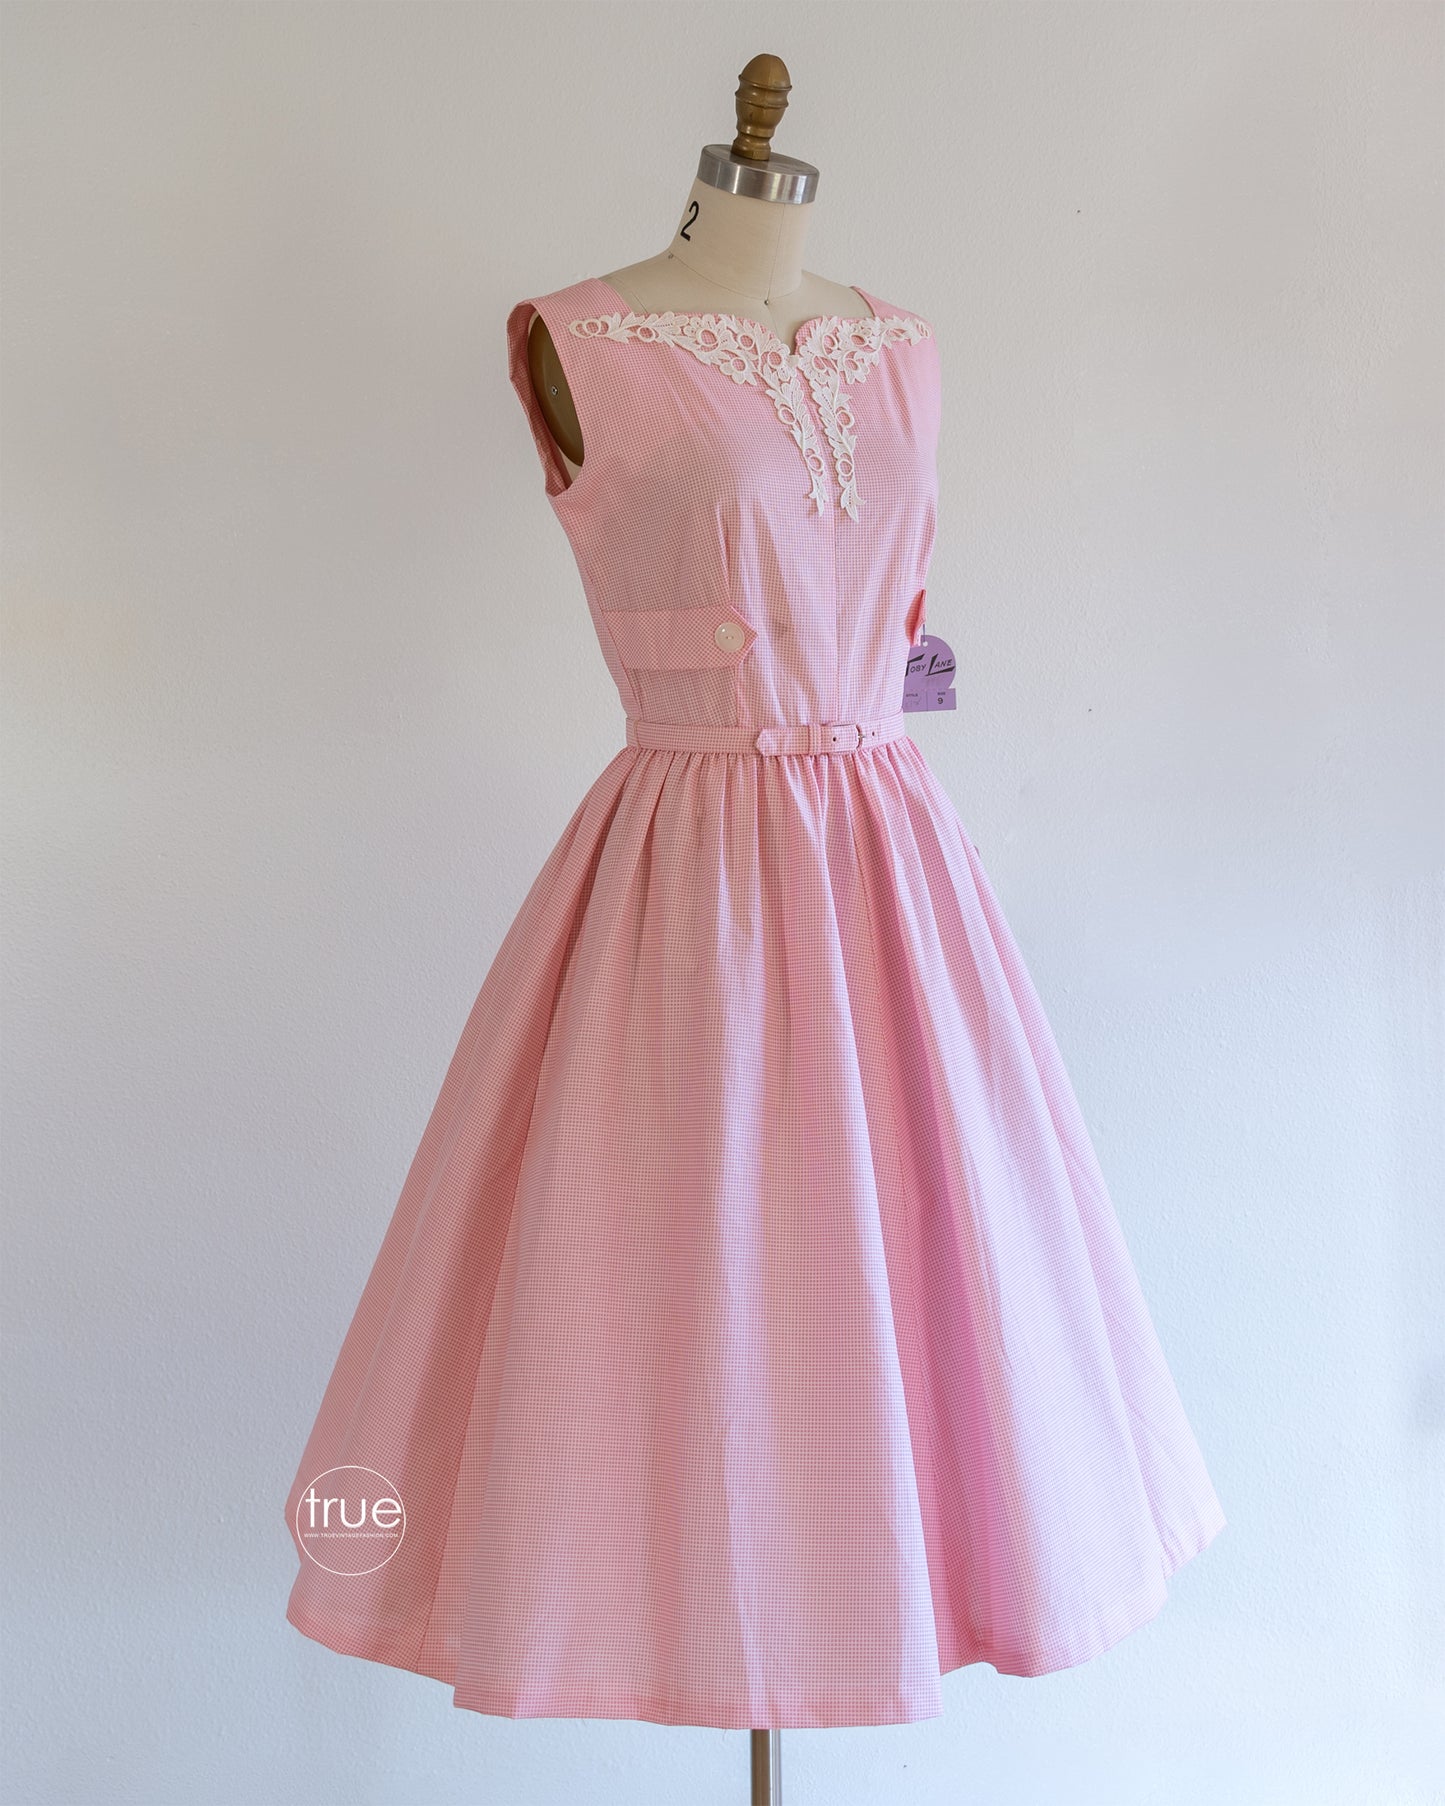 vintage 1950's dress ...deadstock Toby Lane pink checked cotton dress